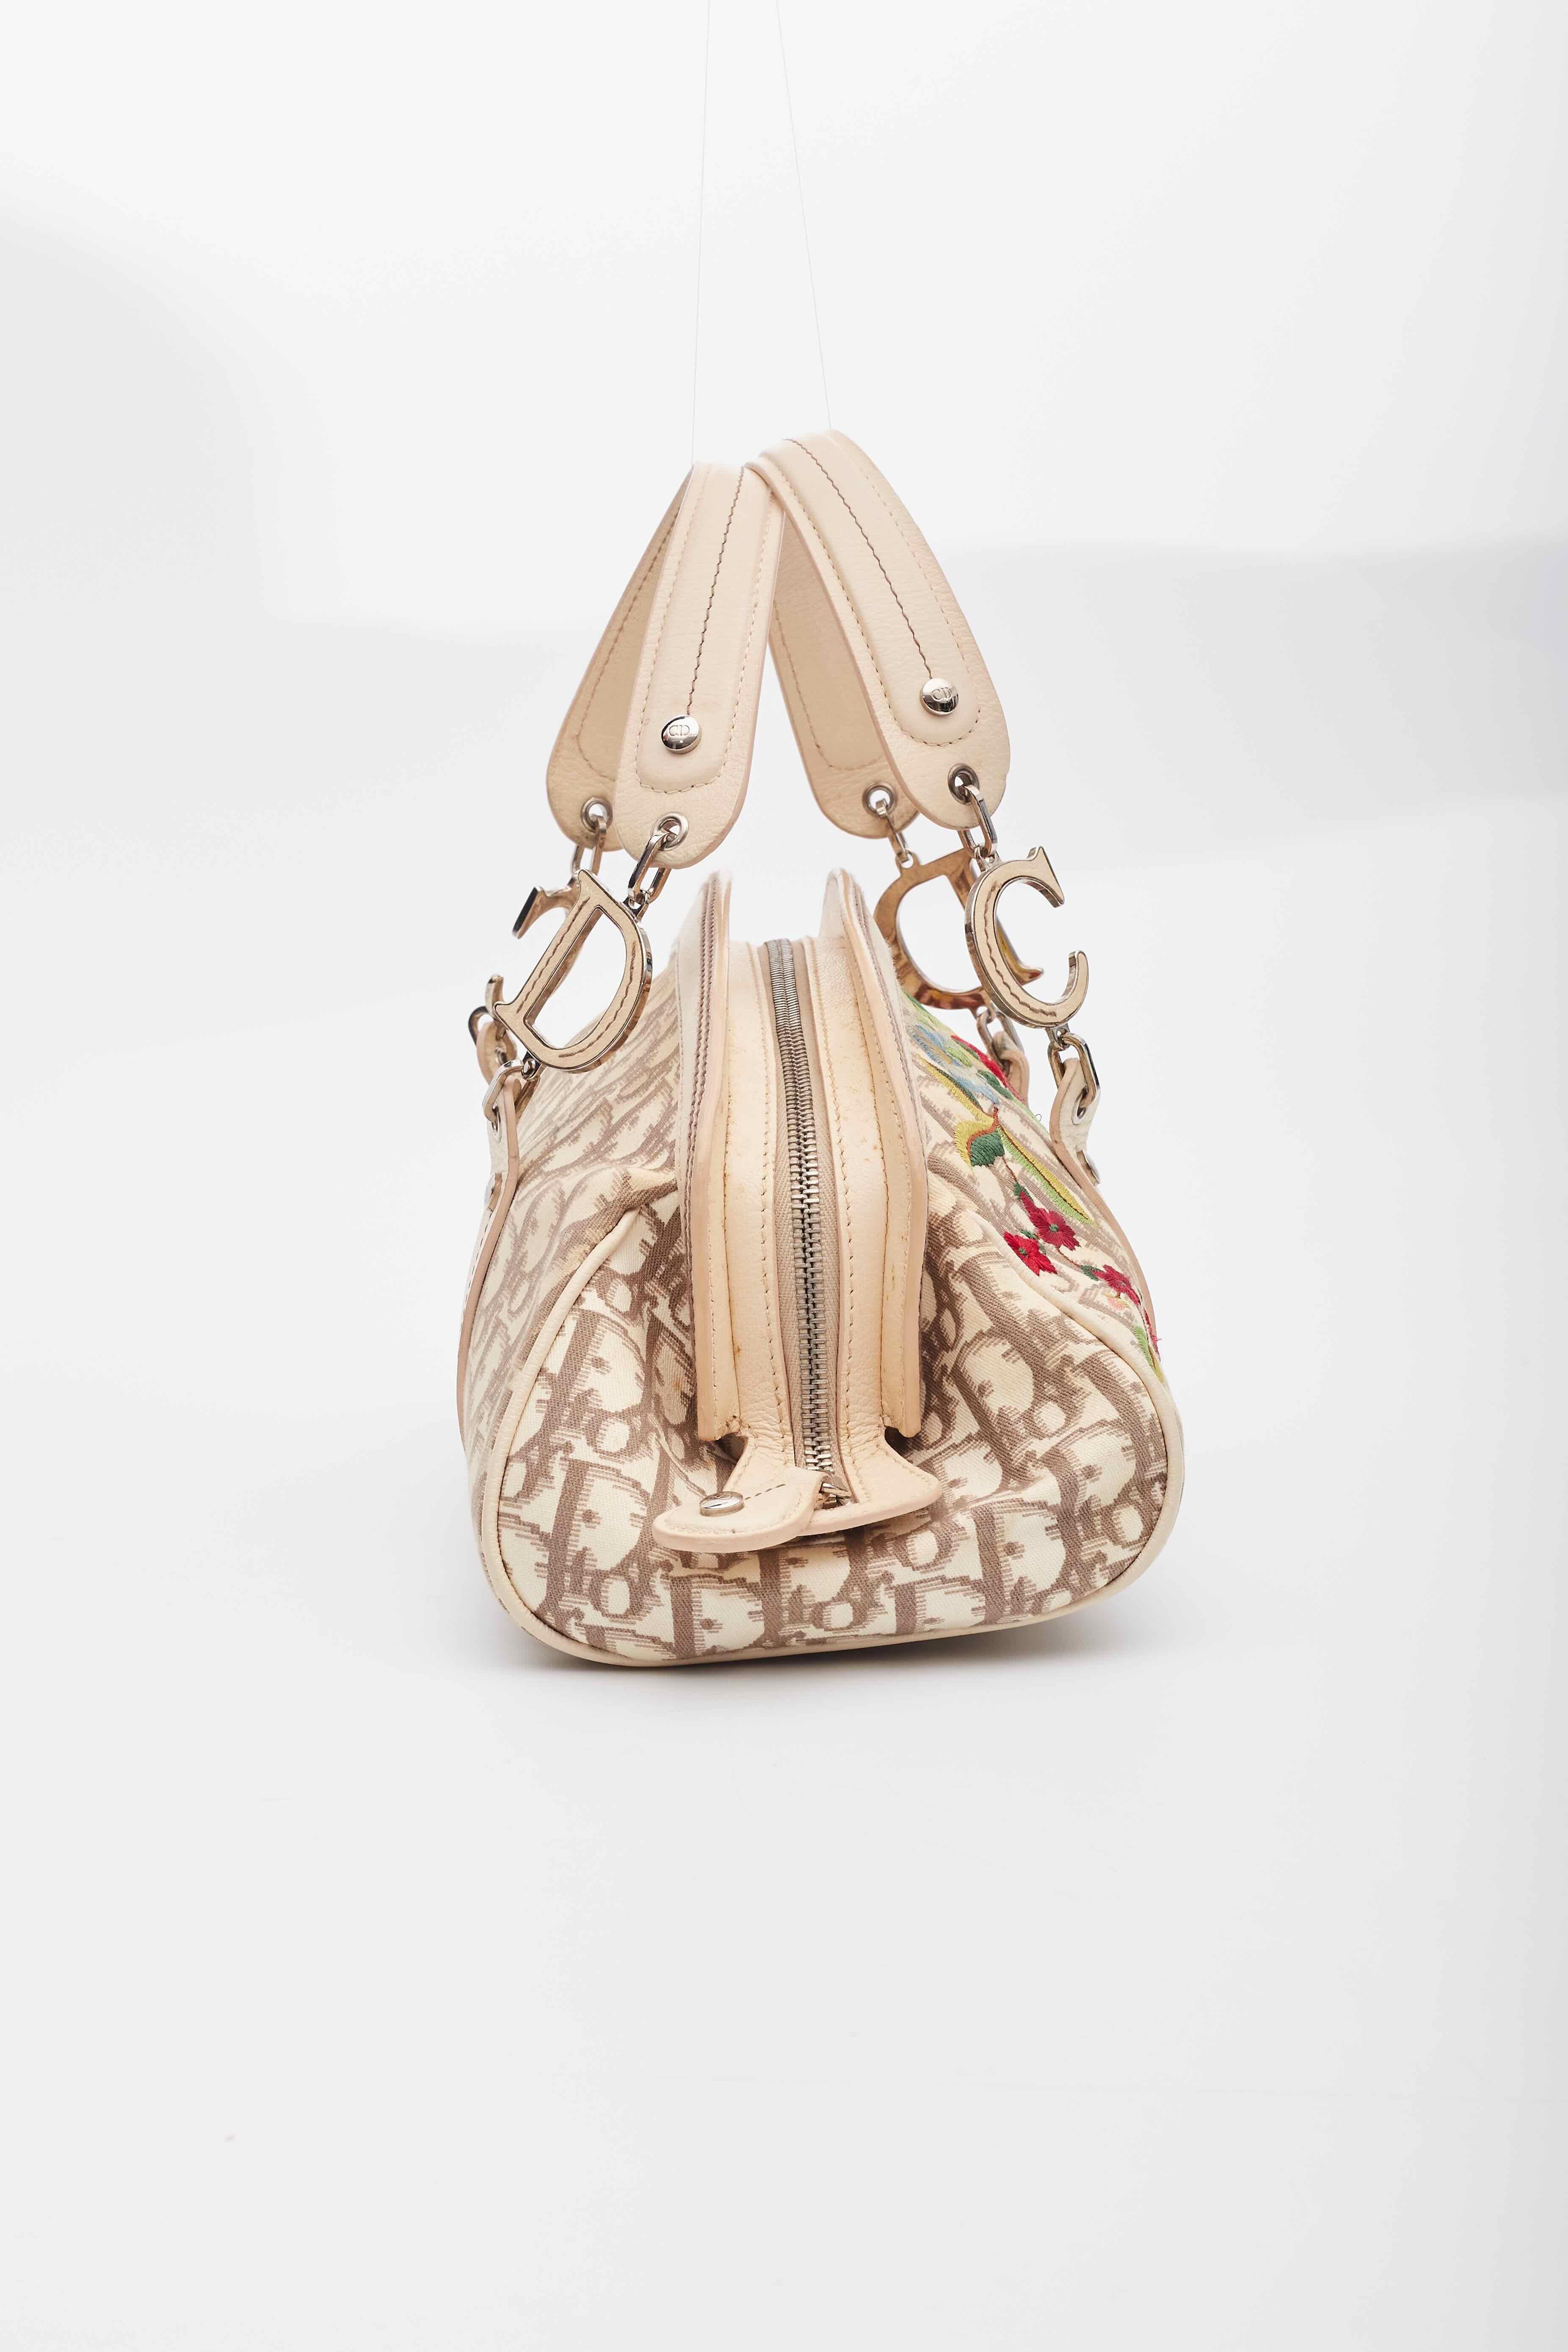 Dior Trotter Diorissimo Flowers Bowling Bag In Good Condition For Sale In Montreal, Quebec